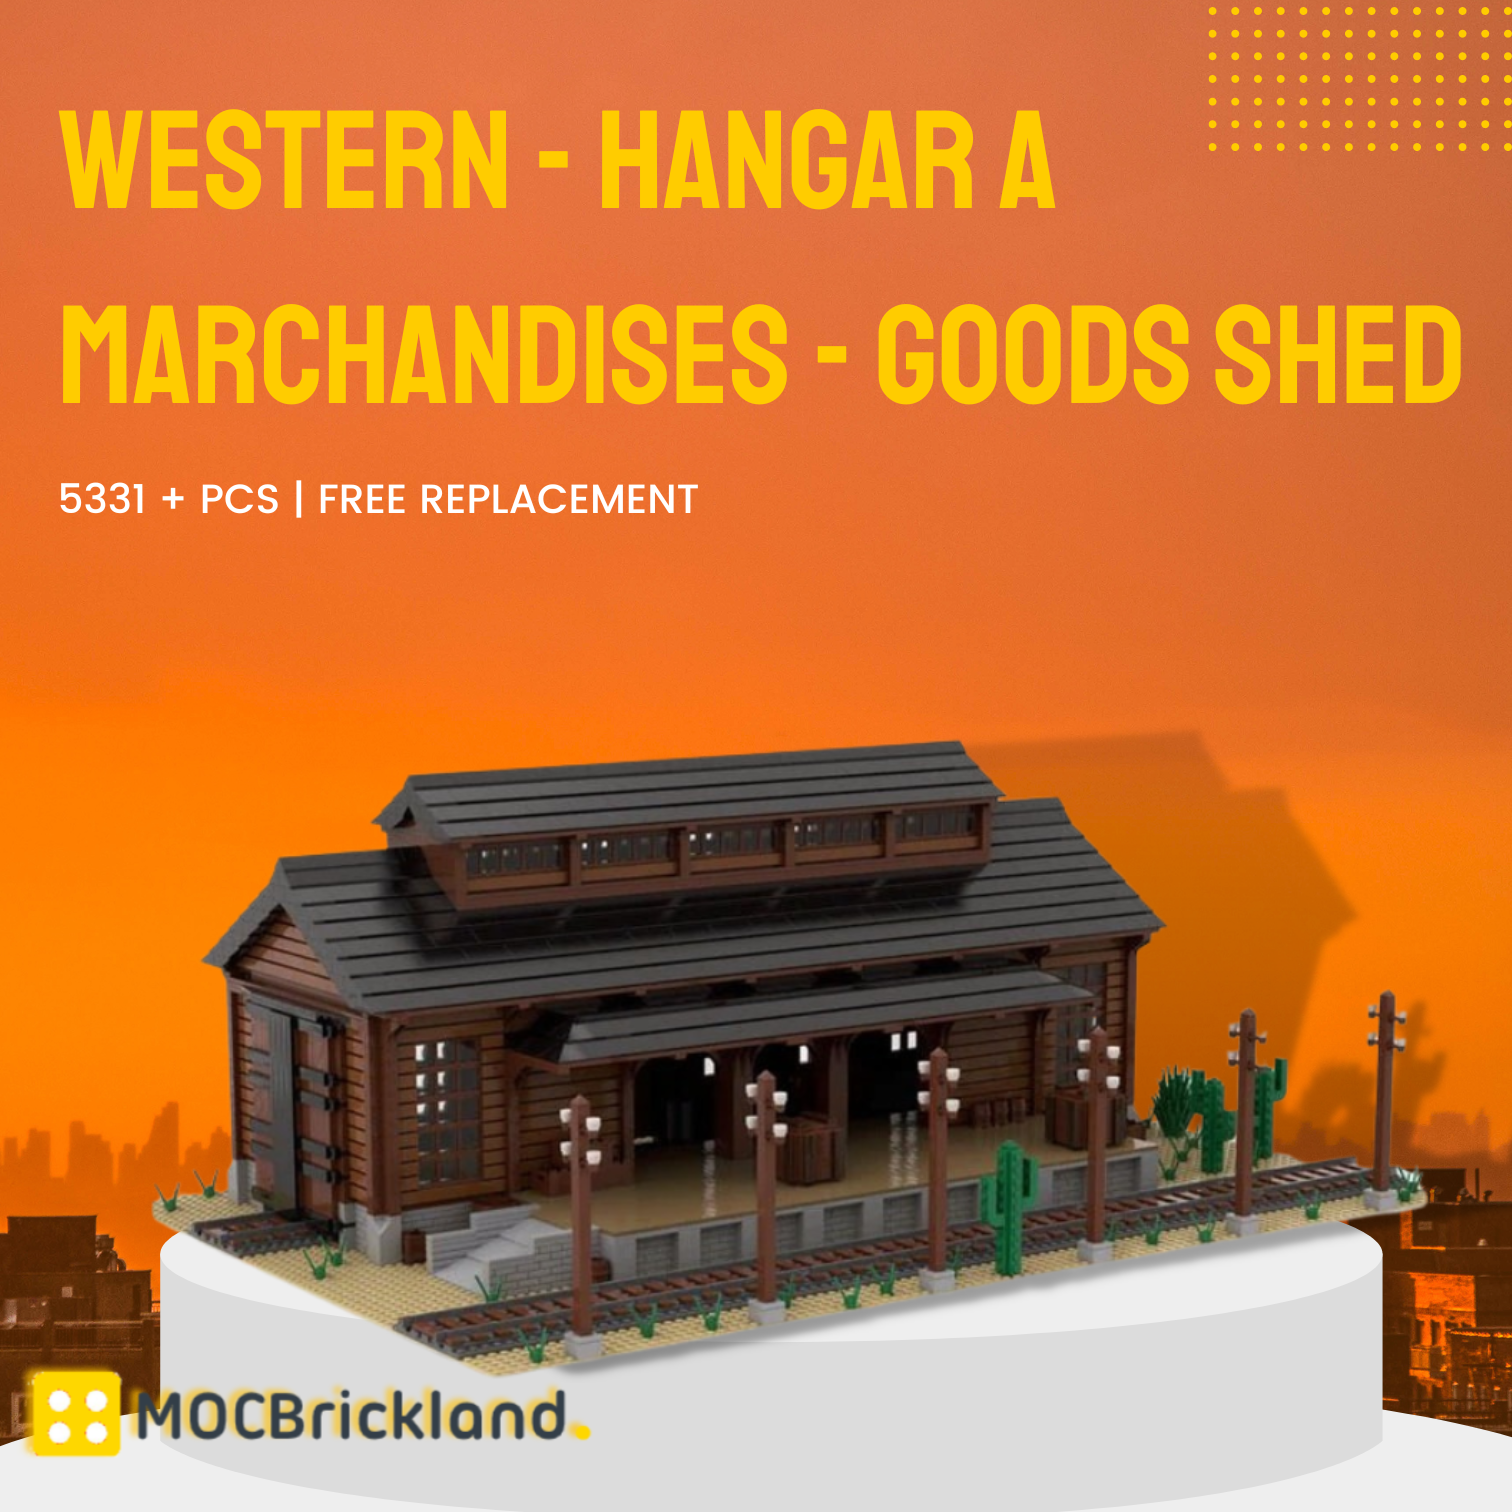 Western - Hangar A Marchandises - Goods Shed MOC-125761 Modular Building With 5331 Pieces